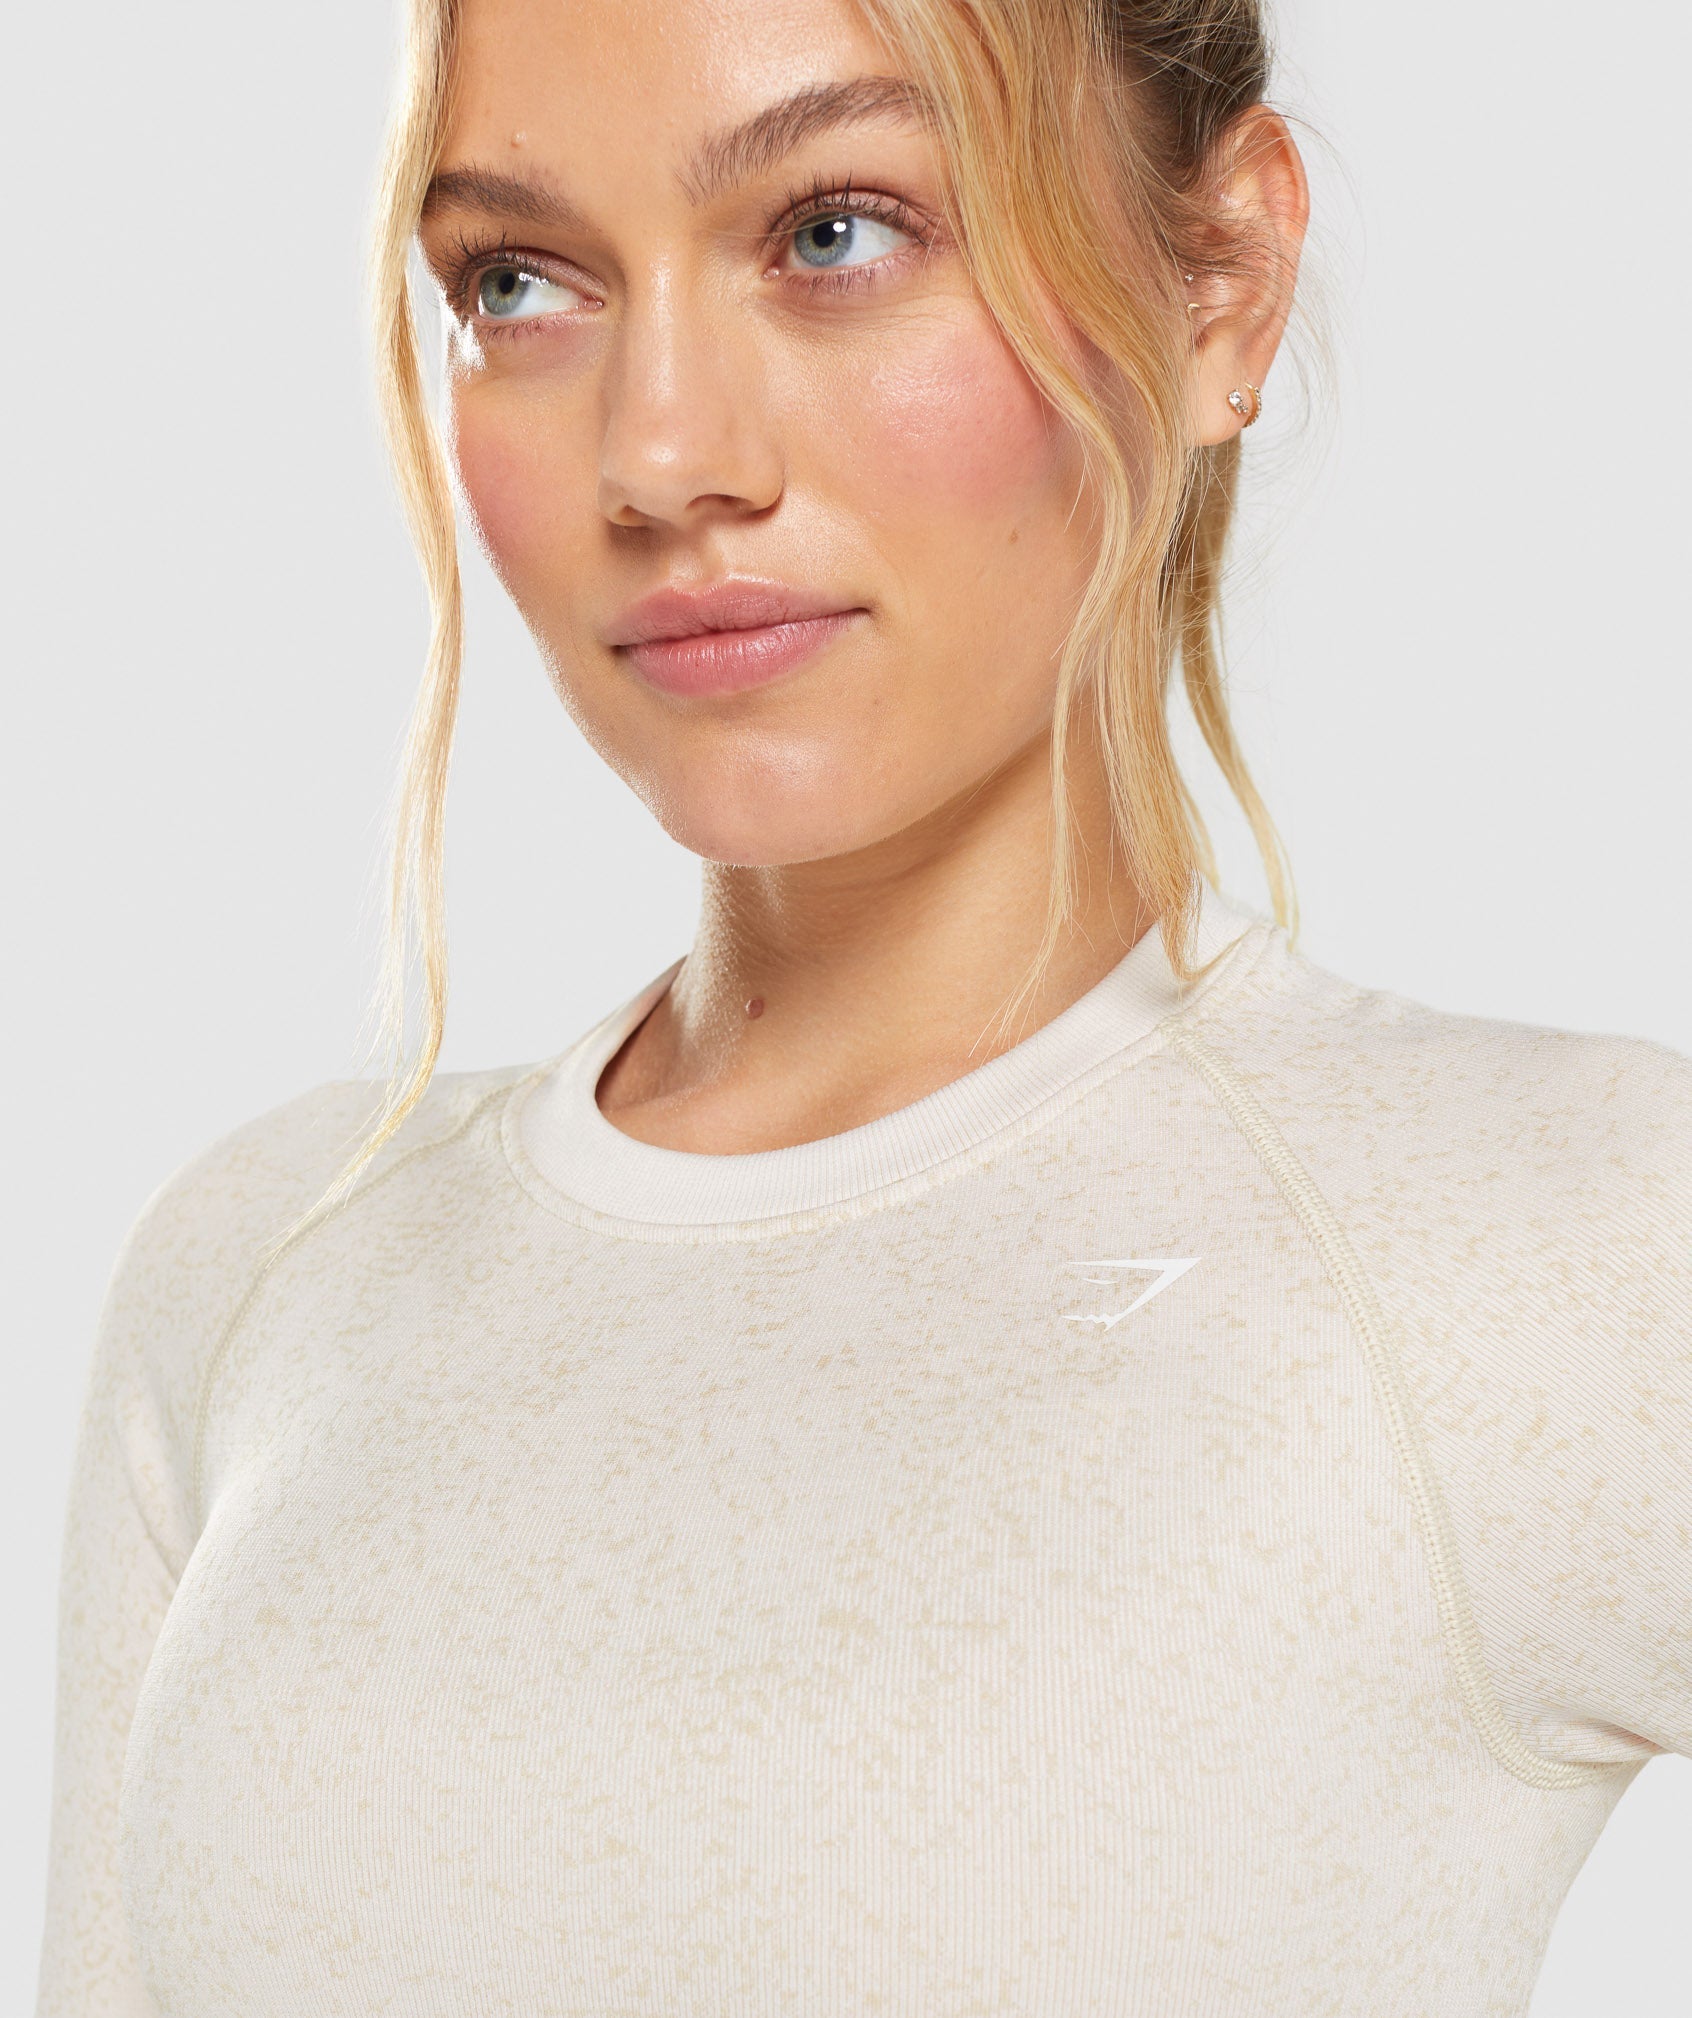 Adapt Fleck Seamless Long Sleeve Crop Top in Mineral | Coconut White - view 6